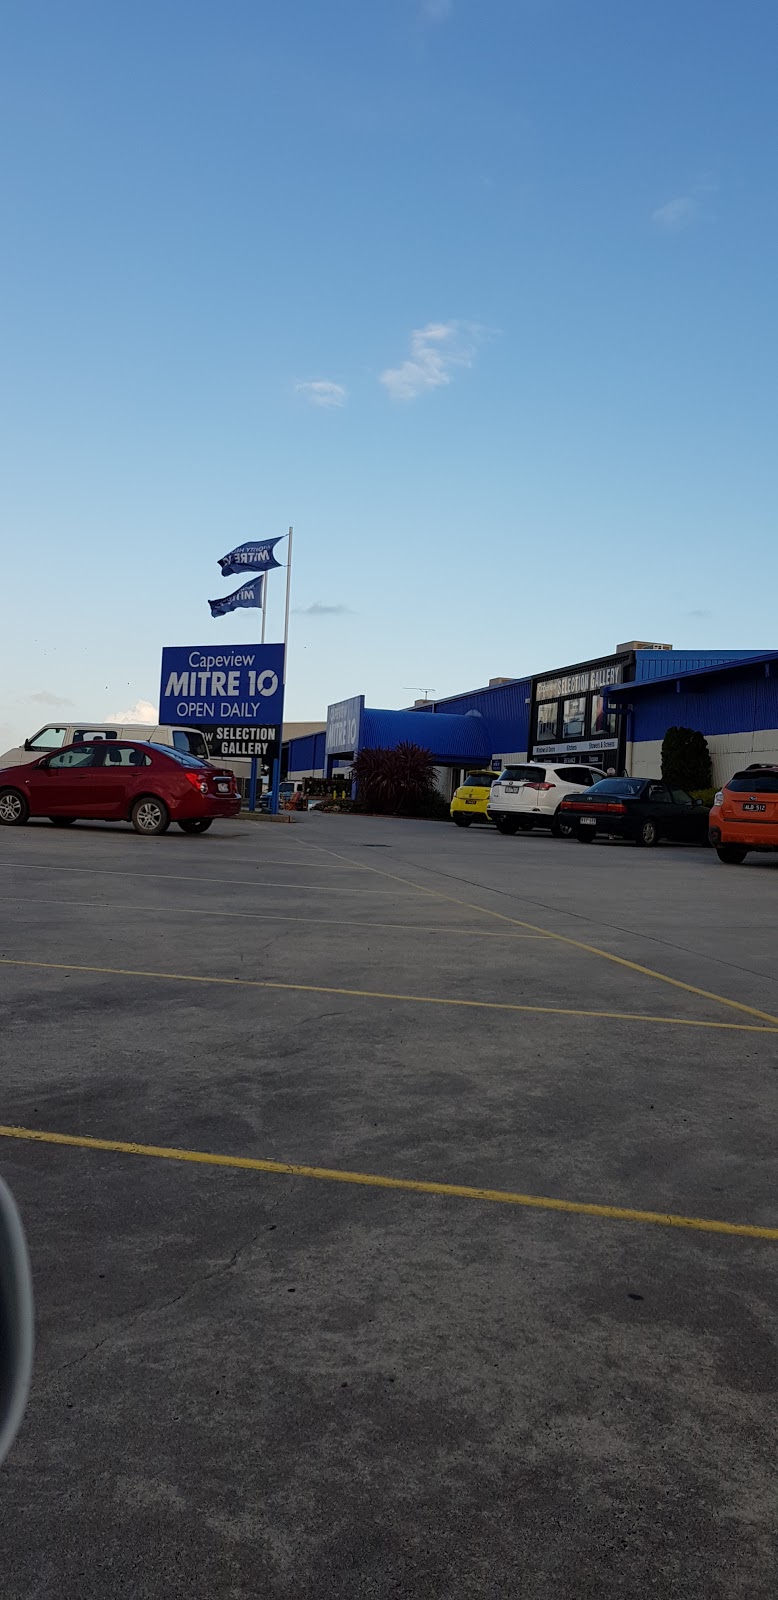 Capeview Mitre 10 (2 Cusack Rd) Opening Hours